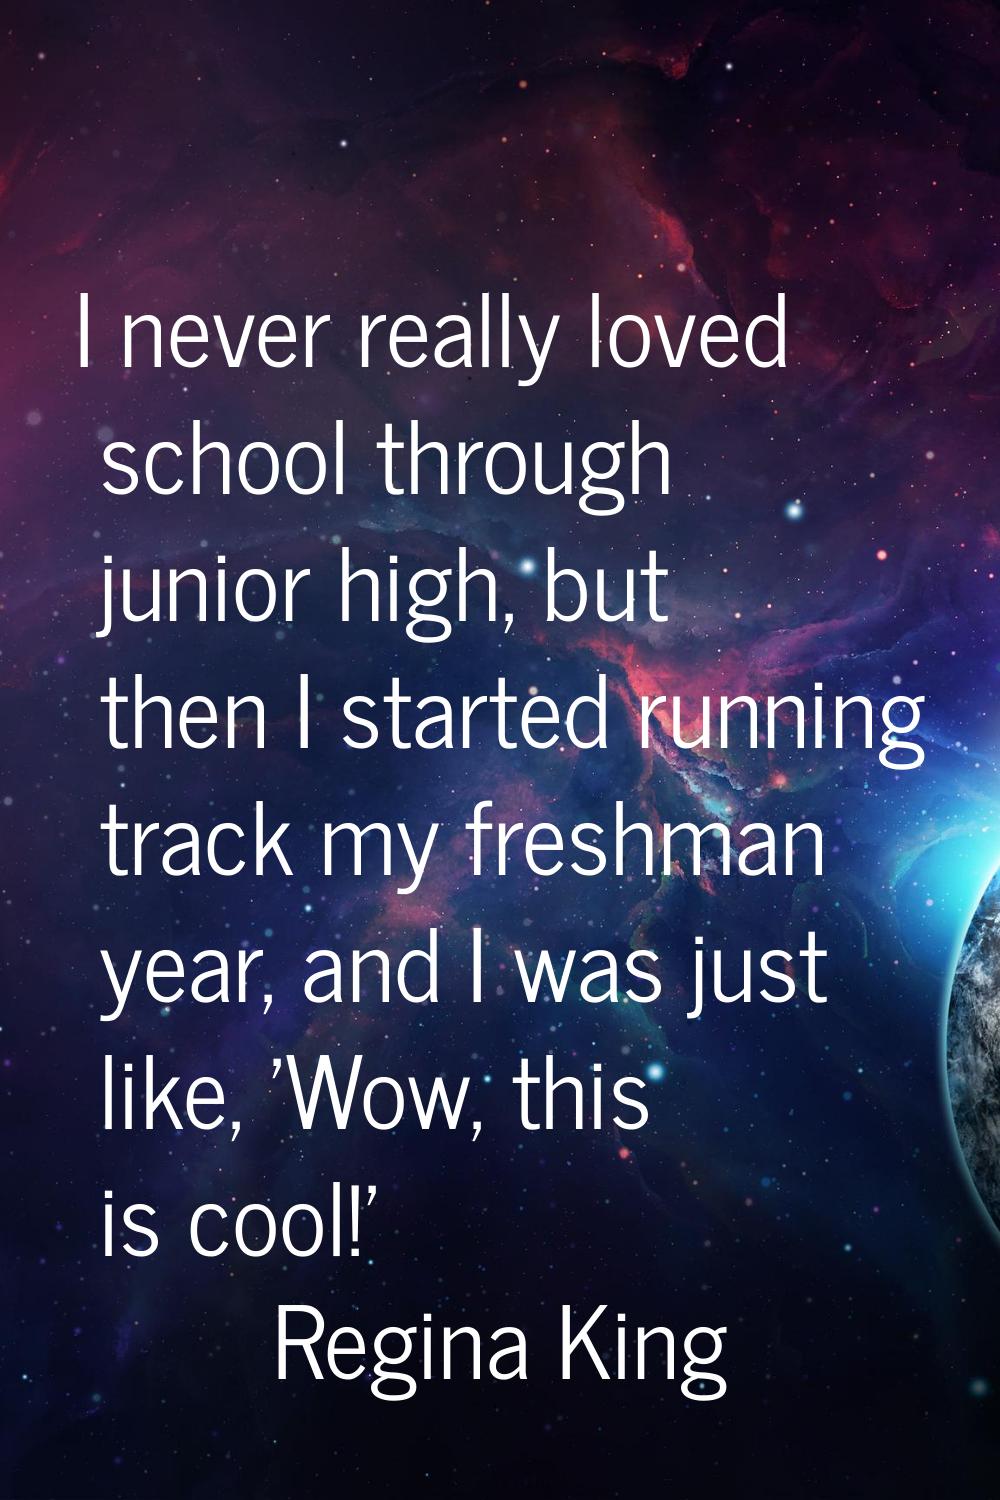 I never really loved school through junior high, but then I started running track my freshman year,